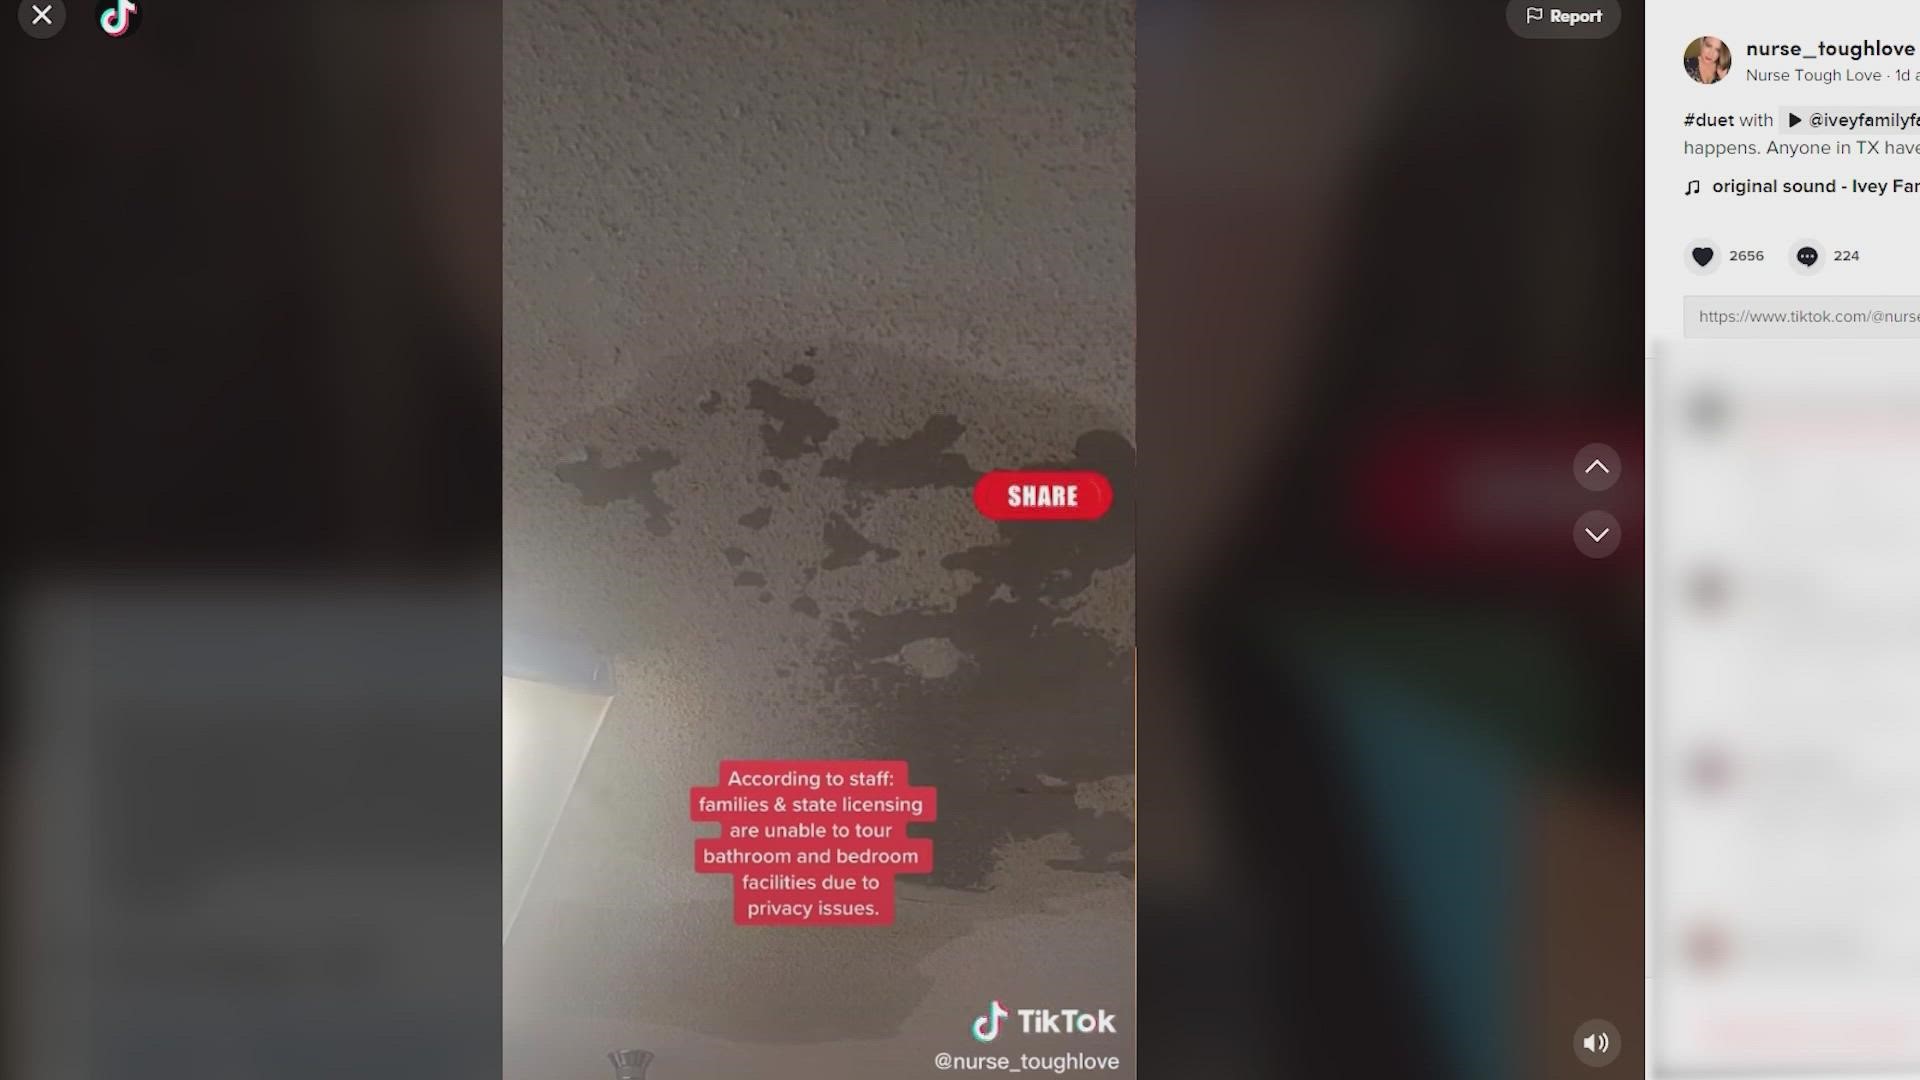 A TikTok video with over 300,000 views shows damage at River Gardens, but the company who operates the home says it lacks context.